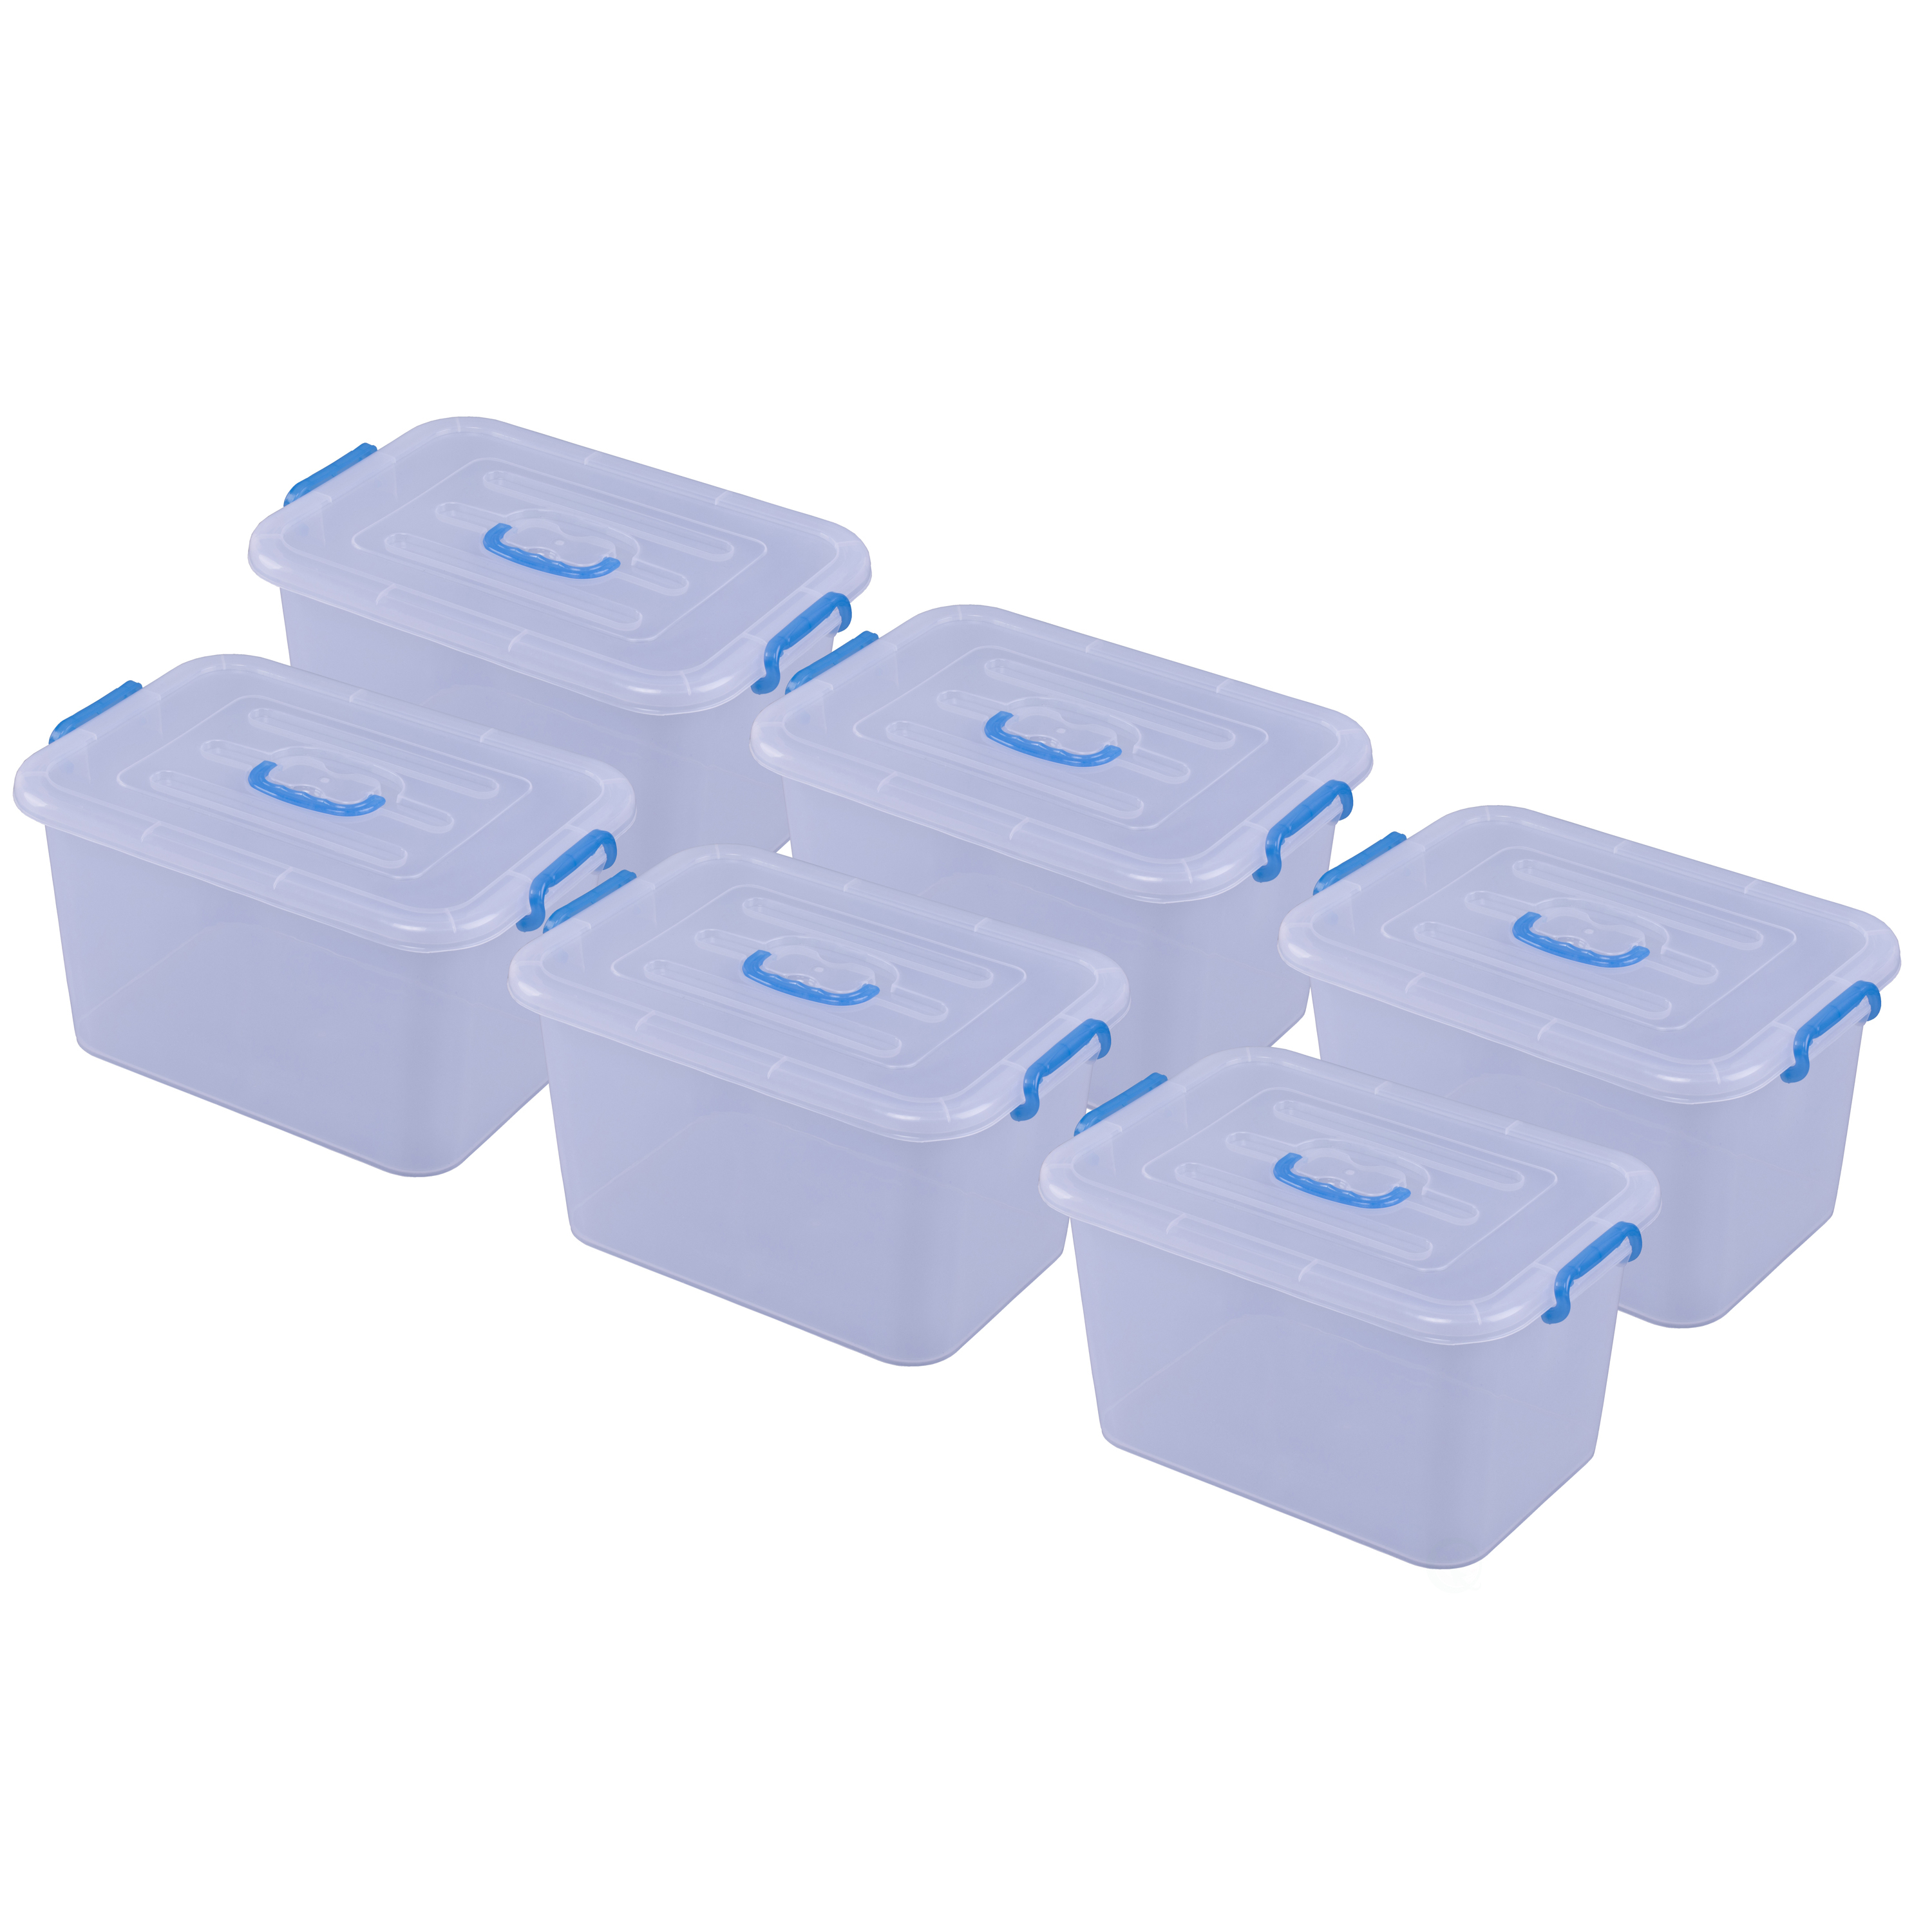 Large Clear Storage Container With Lid and Handles - Set of 6